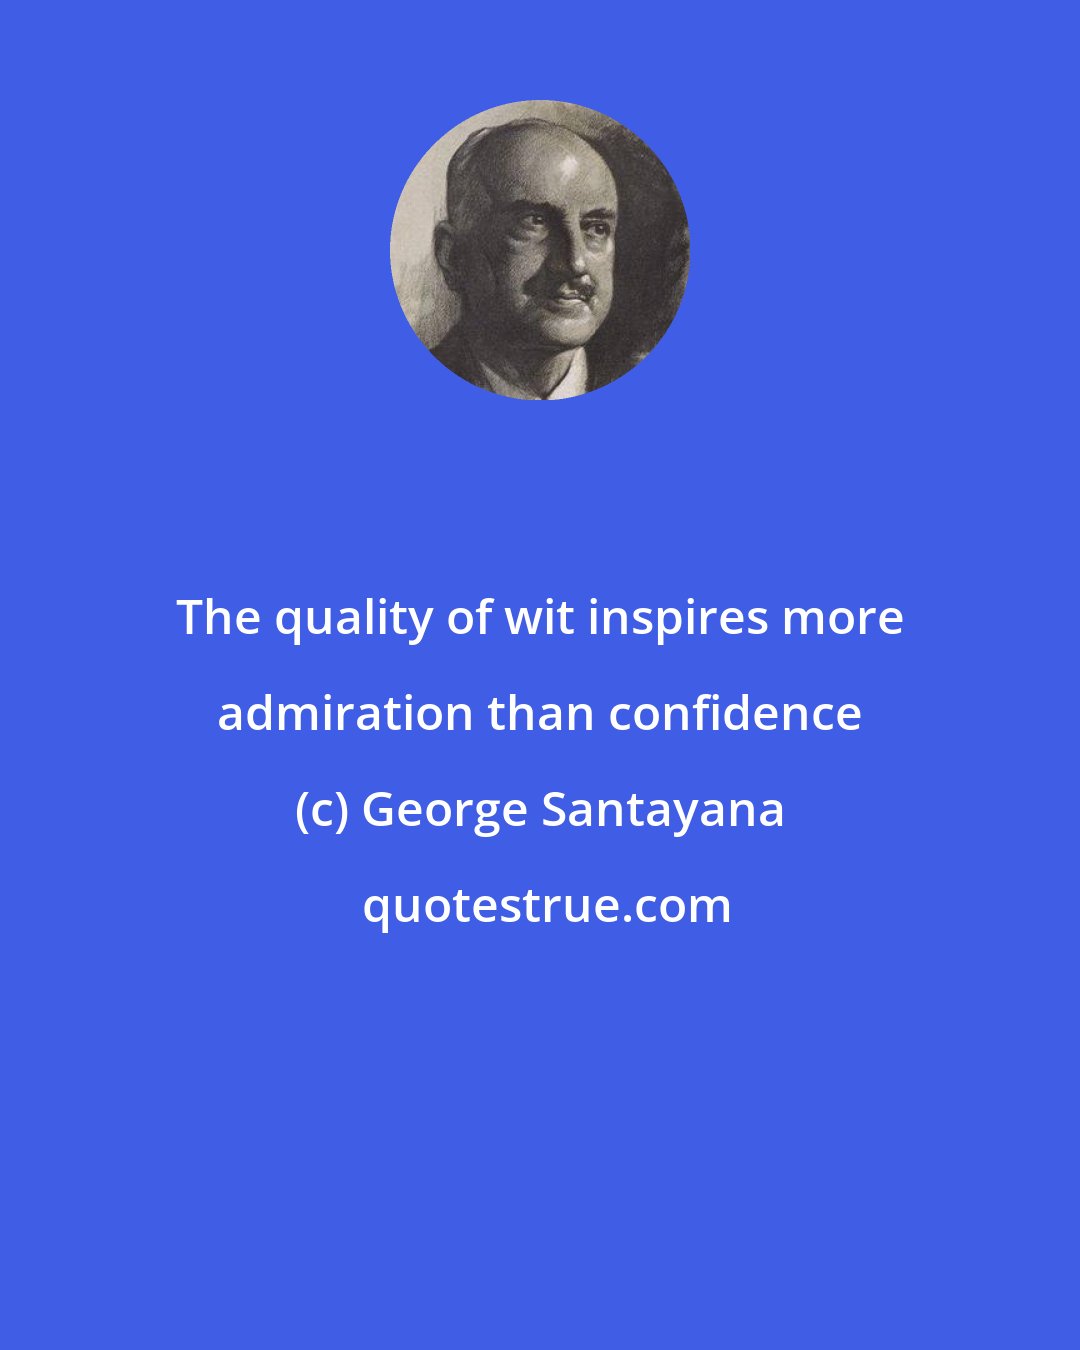 George Santayana: The quality of wit inspires more admiration than confidence